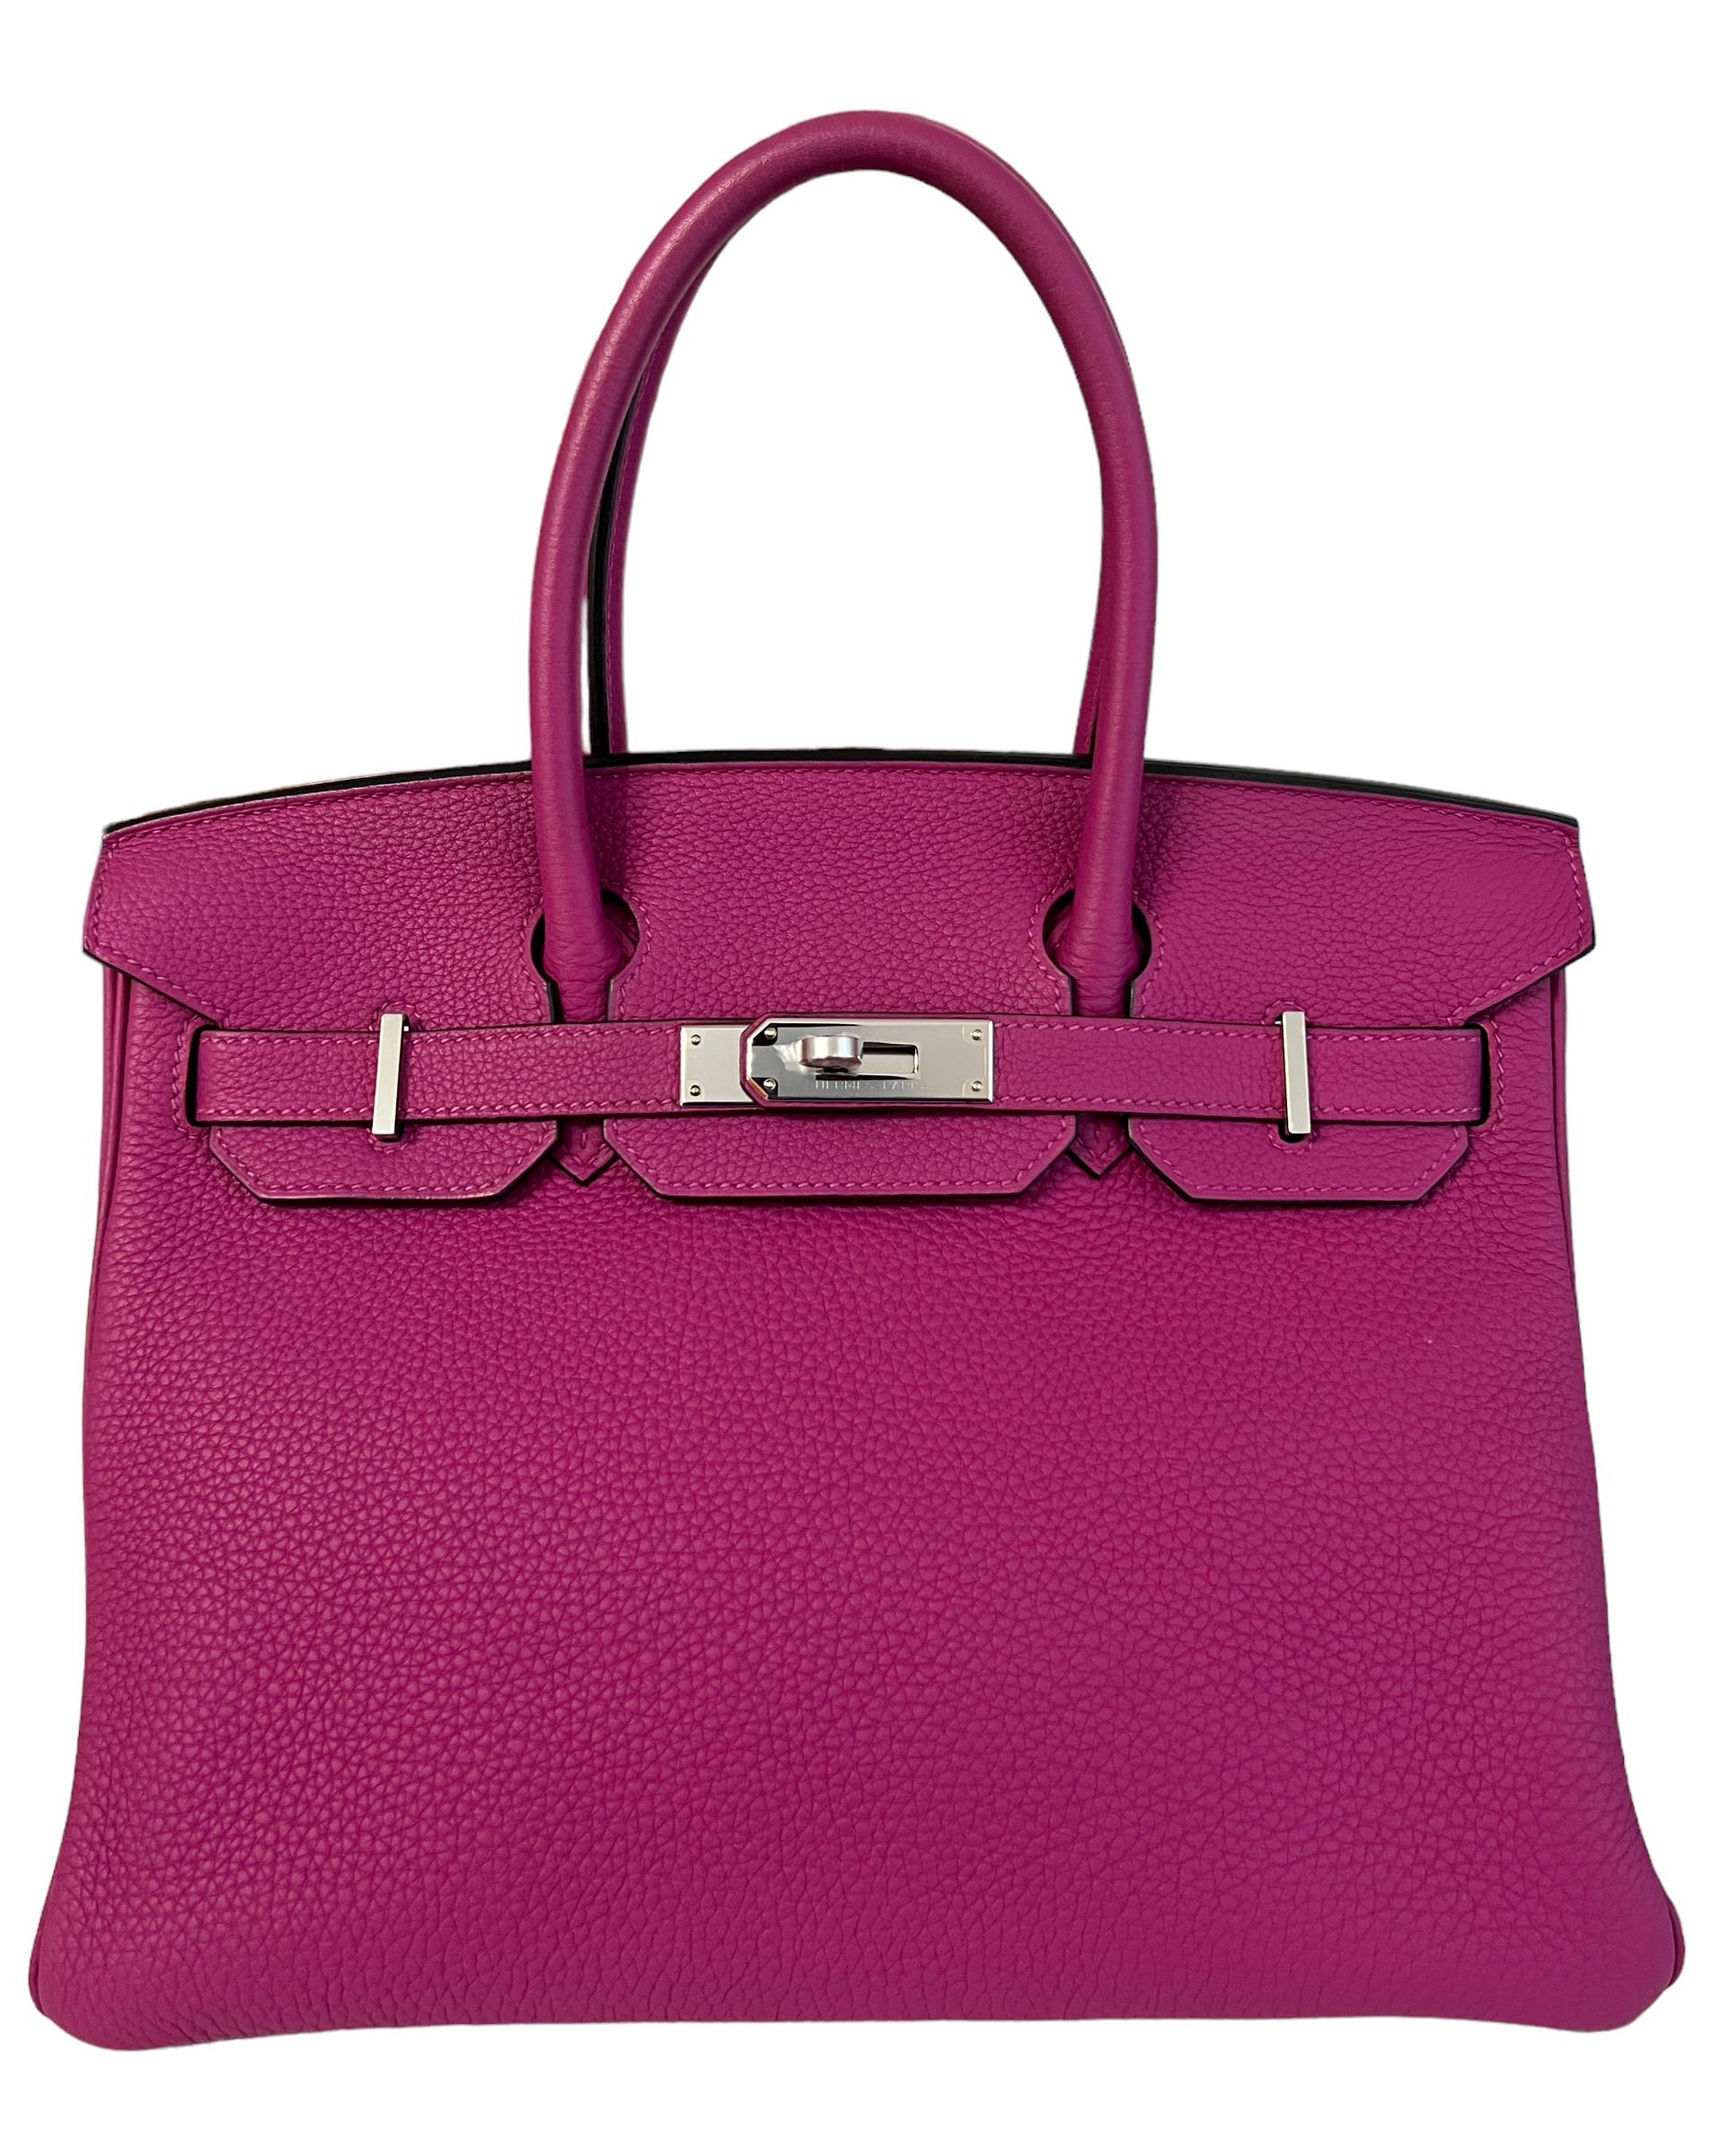 Stunning Pristine Hermes Birkin 30 Rose Pourpre Togo Leather Palladium Hardware. 2020 Y Stamp. Pristine condition with plastic on all hardware. Almost as New, Only Worn A Couple of Times.

Shop with Confidence from Lux Addicts. Authenticity